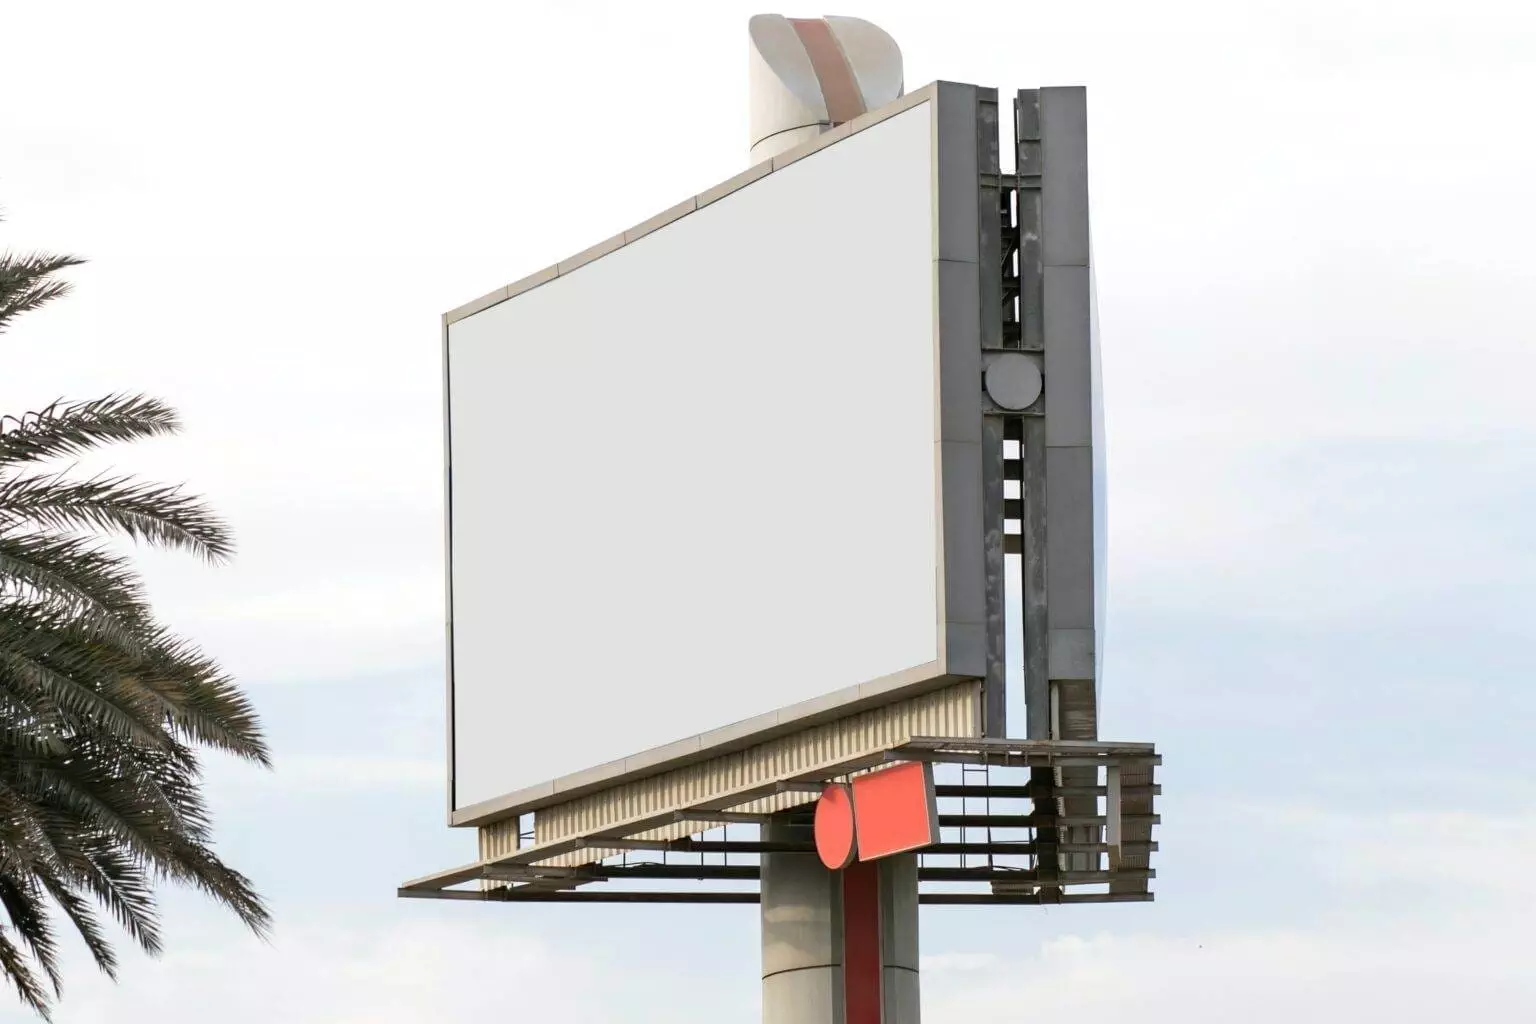 An empty billboard for showing ads.